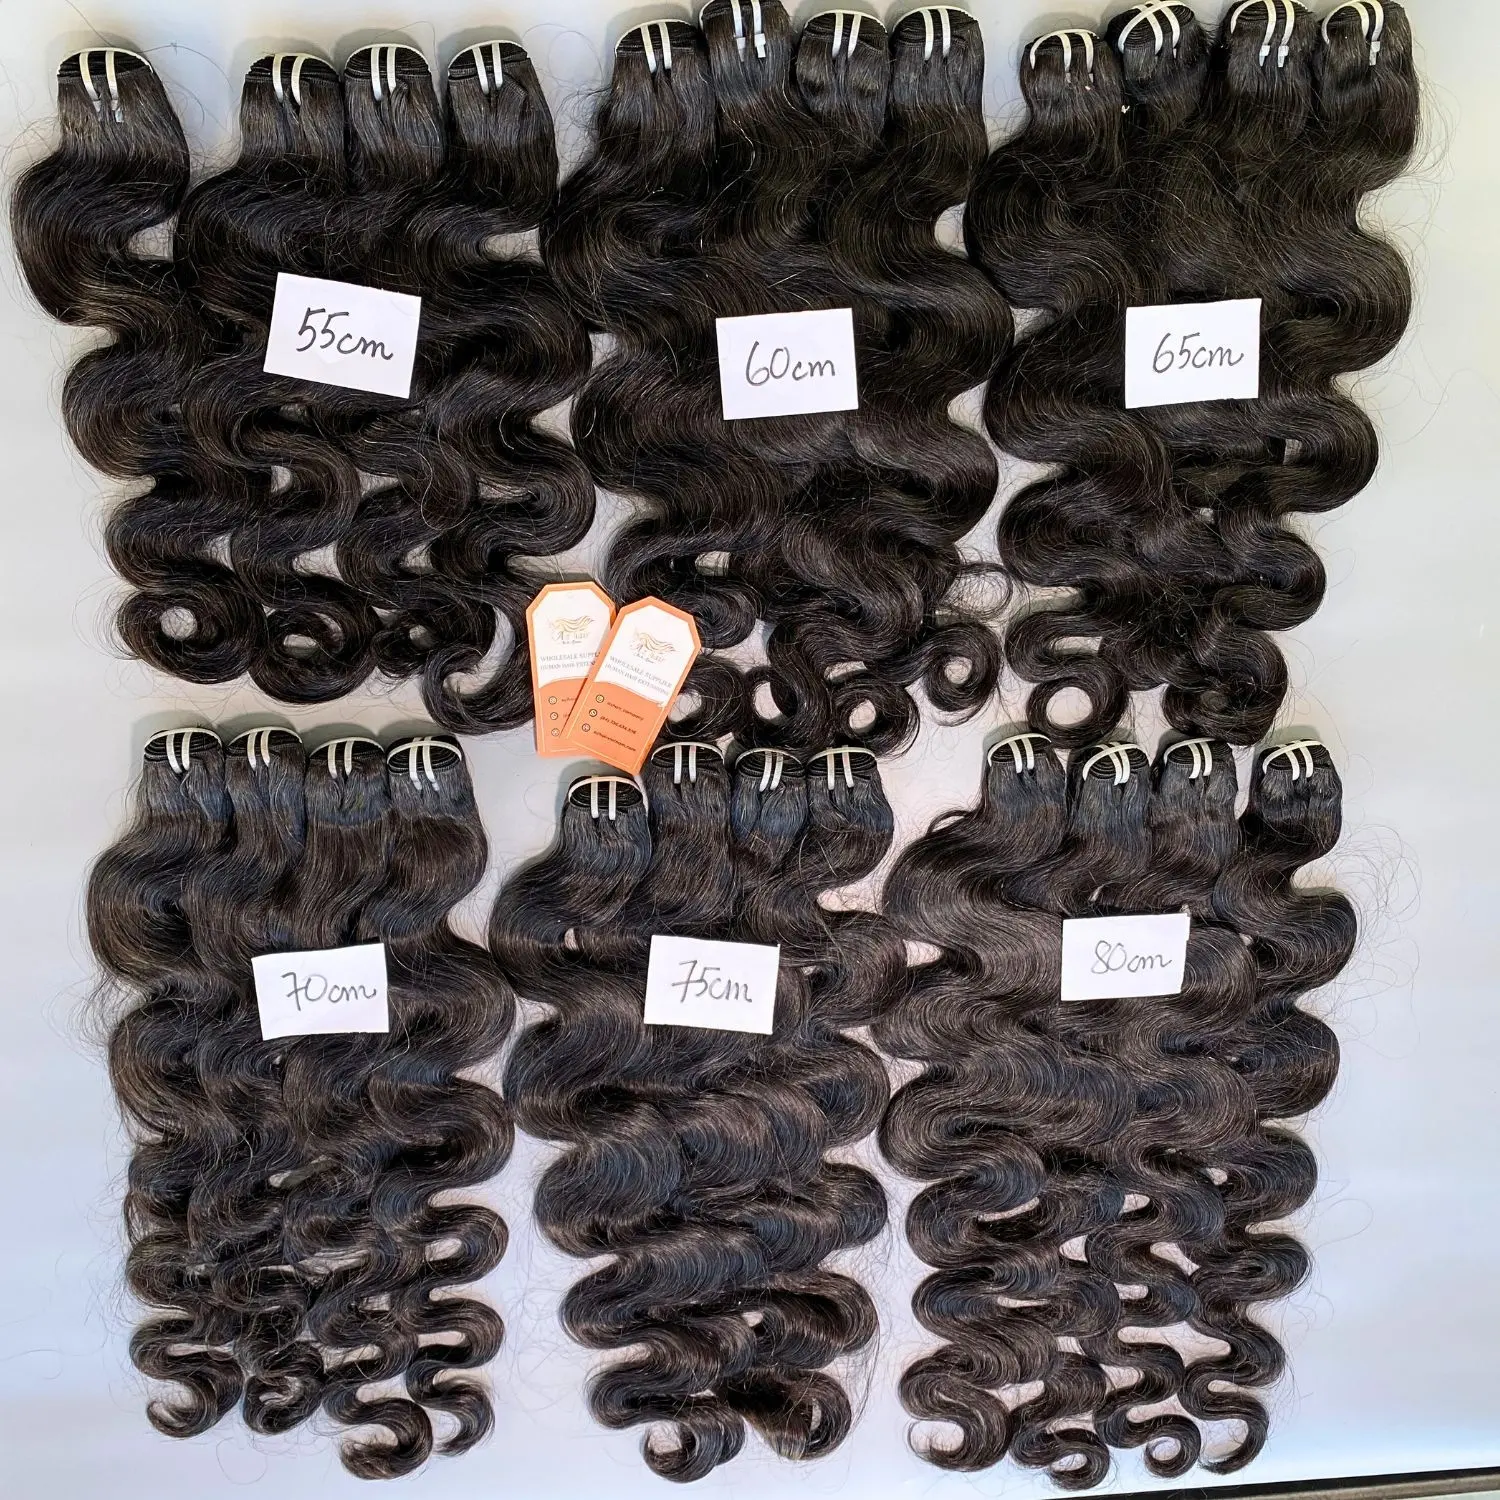 Wholesale Weft Human Hair Extensions 100% Virgin Vietnames Raw Hair and Affordable Price for Your Customers